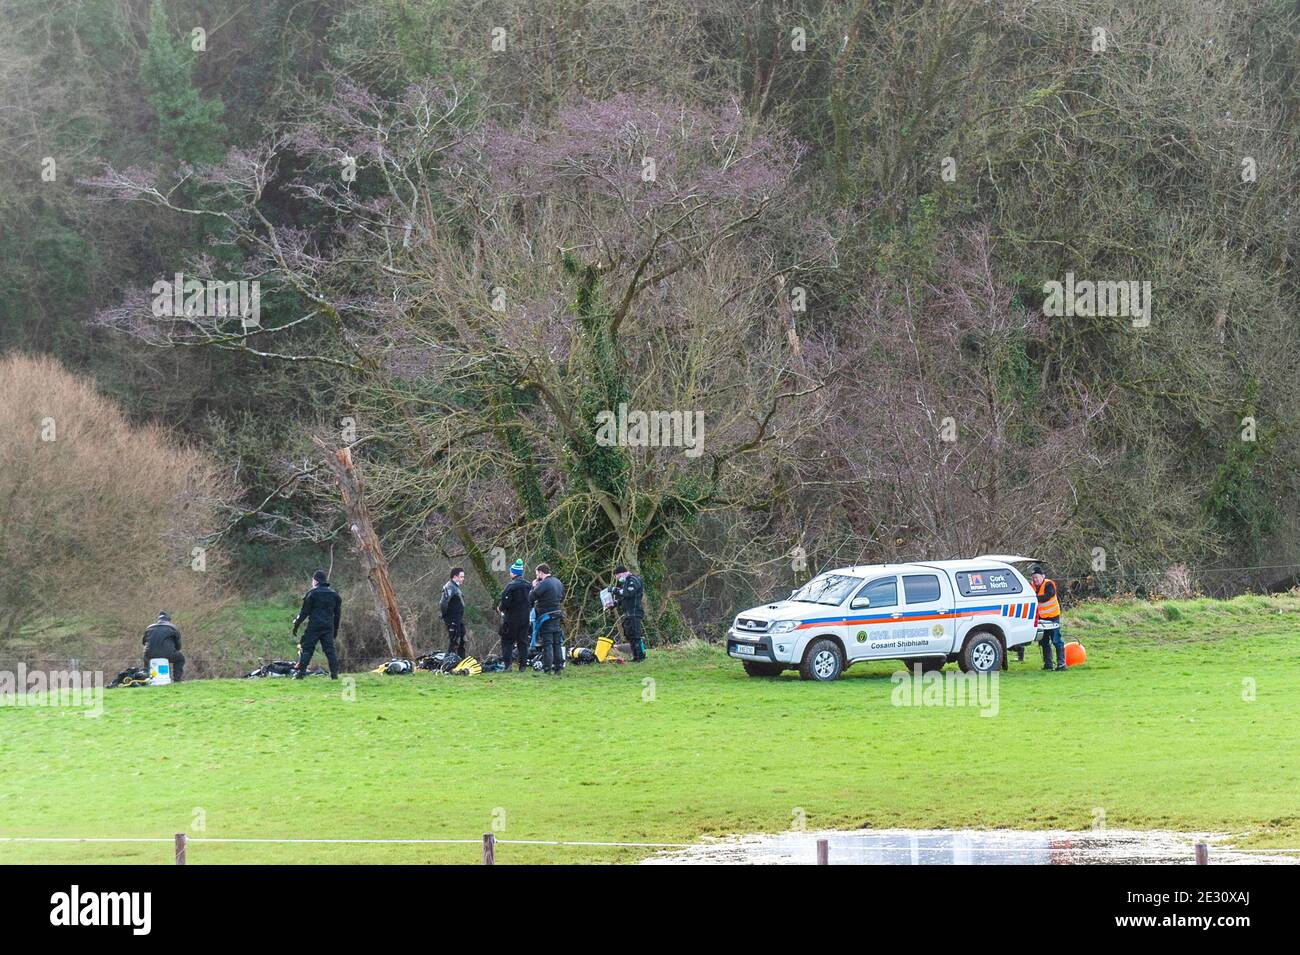 Fermoy, County Cork, Ireland. 16th Jan, 2021. A search for missing Fermoy woman, 67 year old Catherine Reidy, is currently taking place on and around the River Blackwater, just outside Fermoy today. The search began on Wednesday evening and has continued every day since. Agencies involved in the search include An Garda Siochana, Civil Defence, West Cork Underwater Search and Rescue, Blackwater Search and Recovery, Cork City Missing Persons Search and Recovery, Mallow Search and Rescue and the local community. Credit: AG News/Alamy Live News Stock Photo